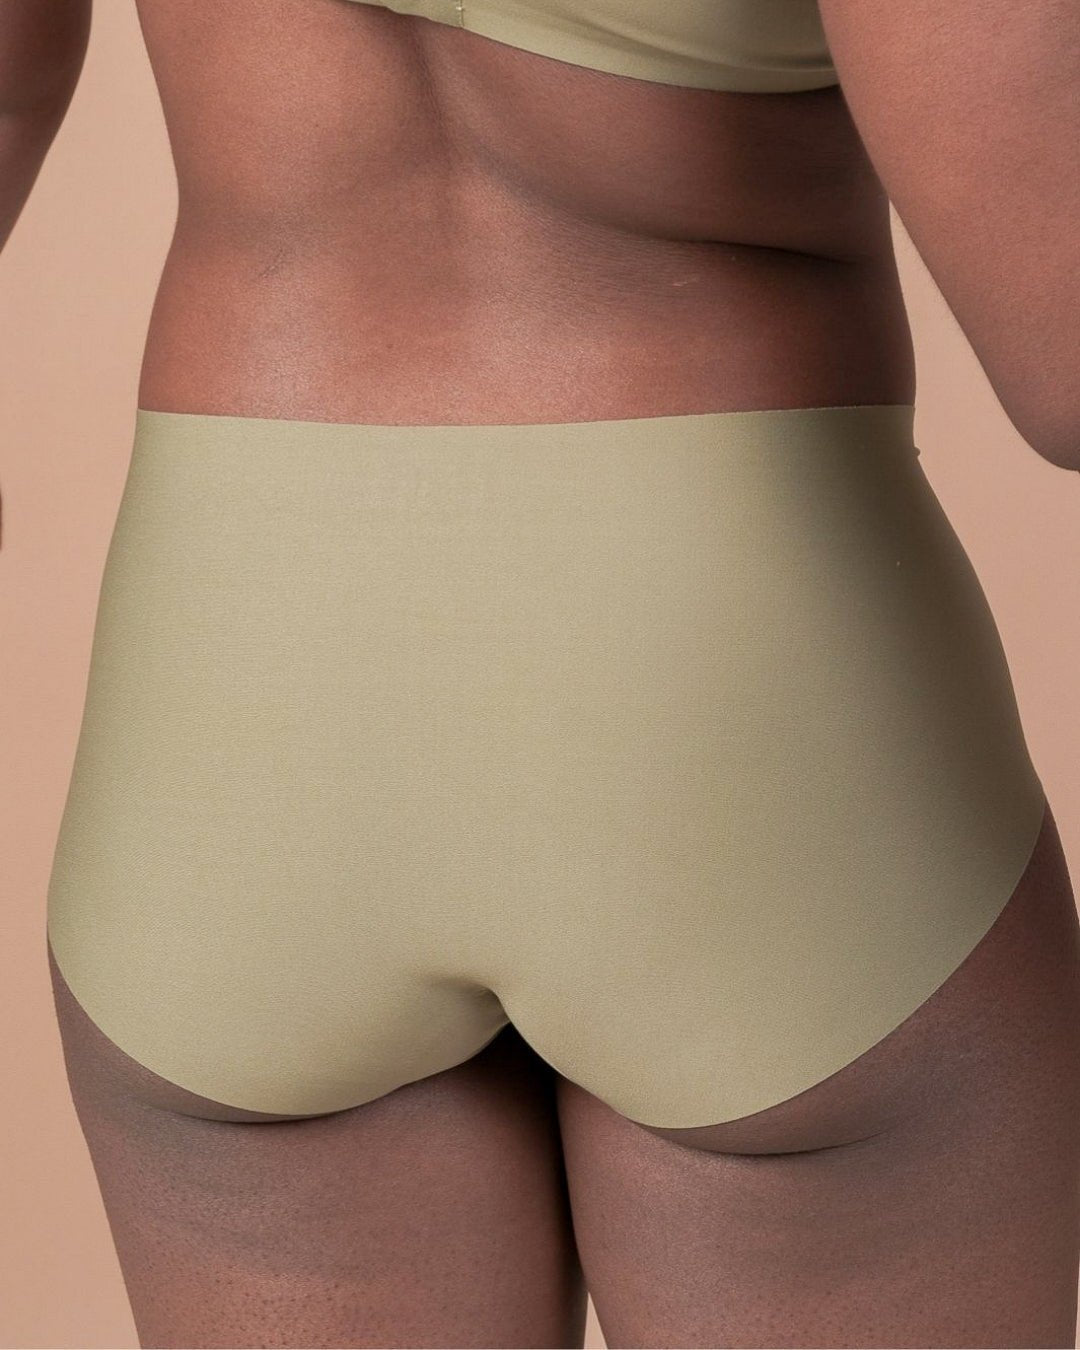 Buy Seamless Cotton Boy Shorts Tights Panty smooth waistband. For